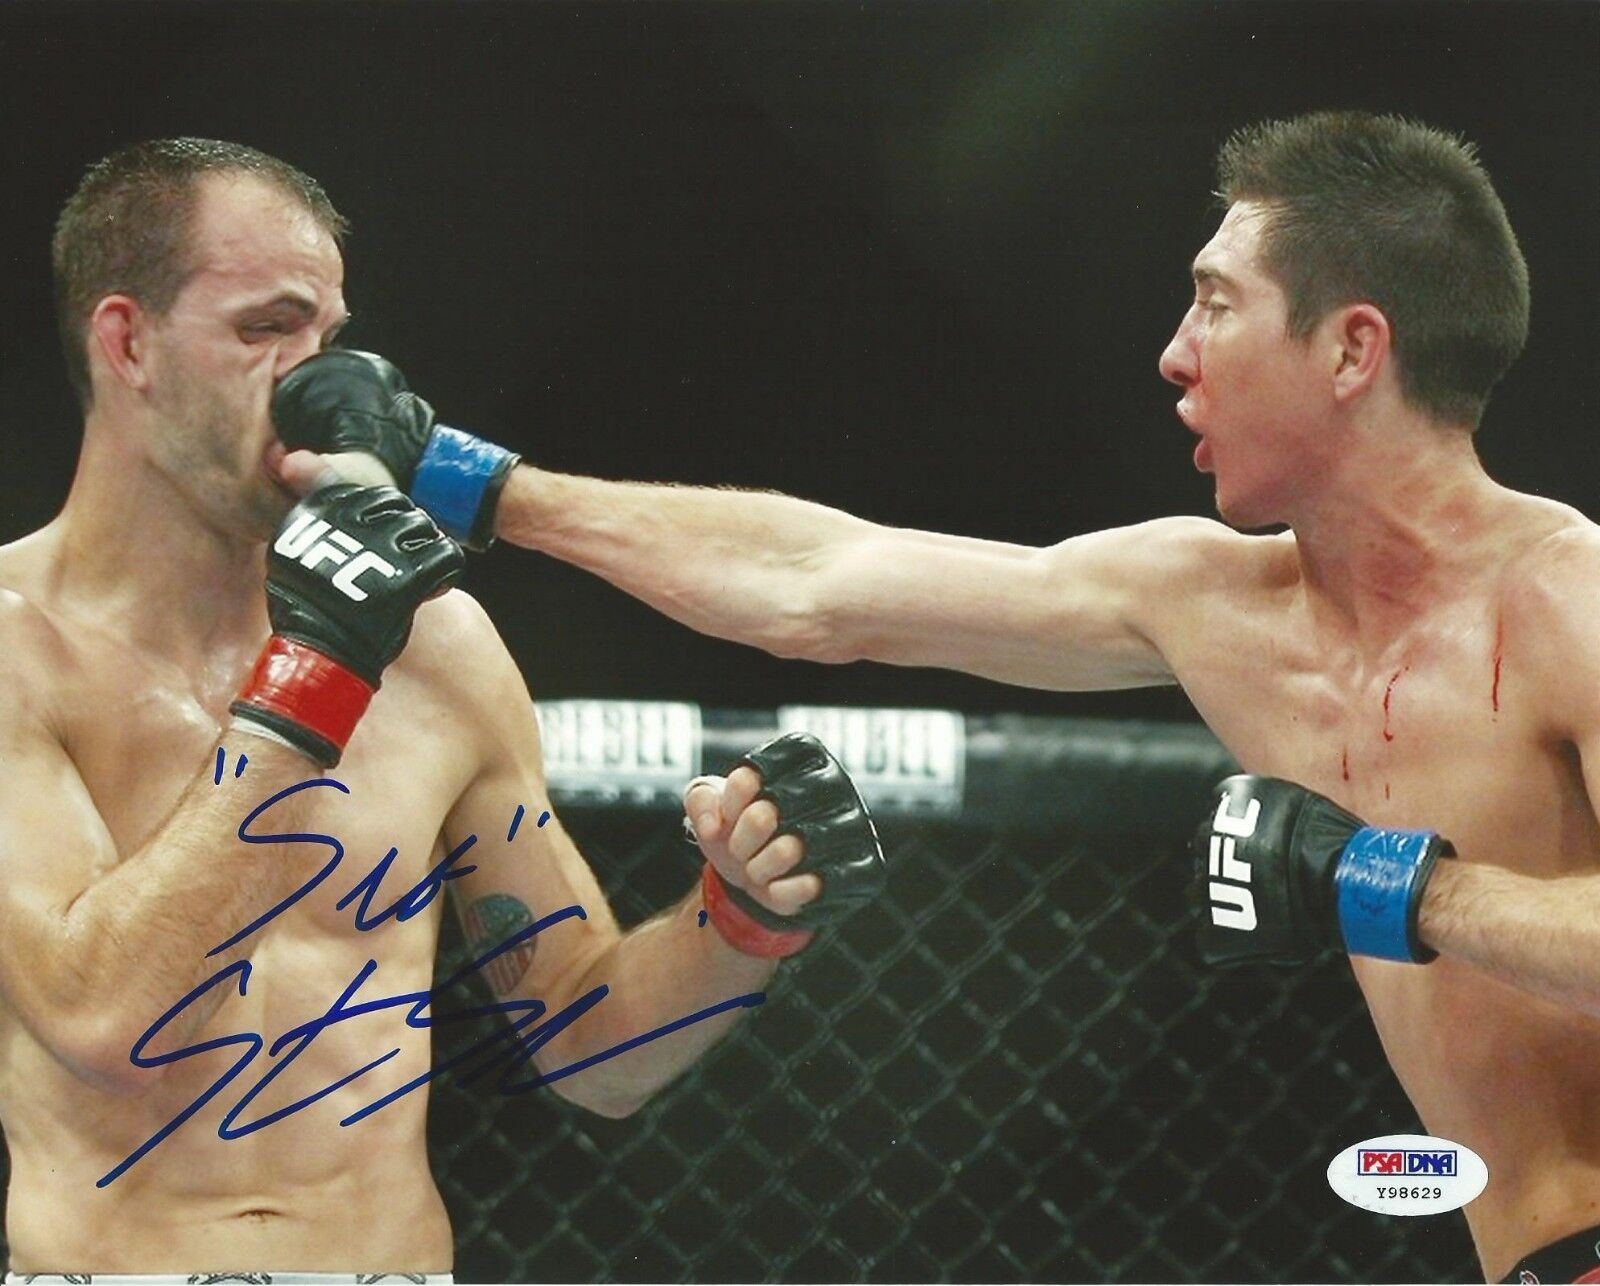 Steven Siler Signed UFC 8x10 Photo Poster painting PSA/DNA COA Picture Autograph 154 159 on FX 2